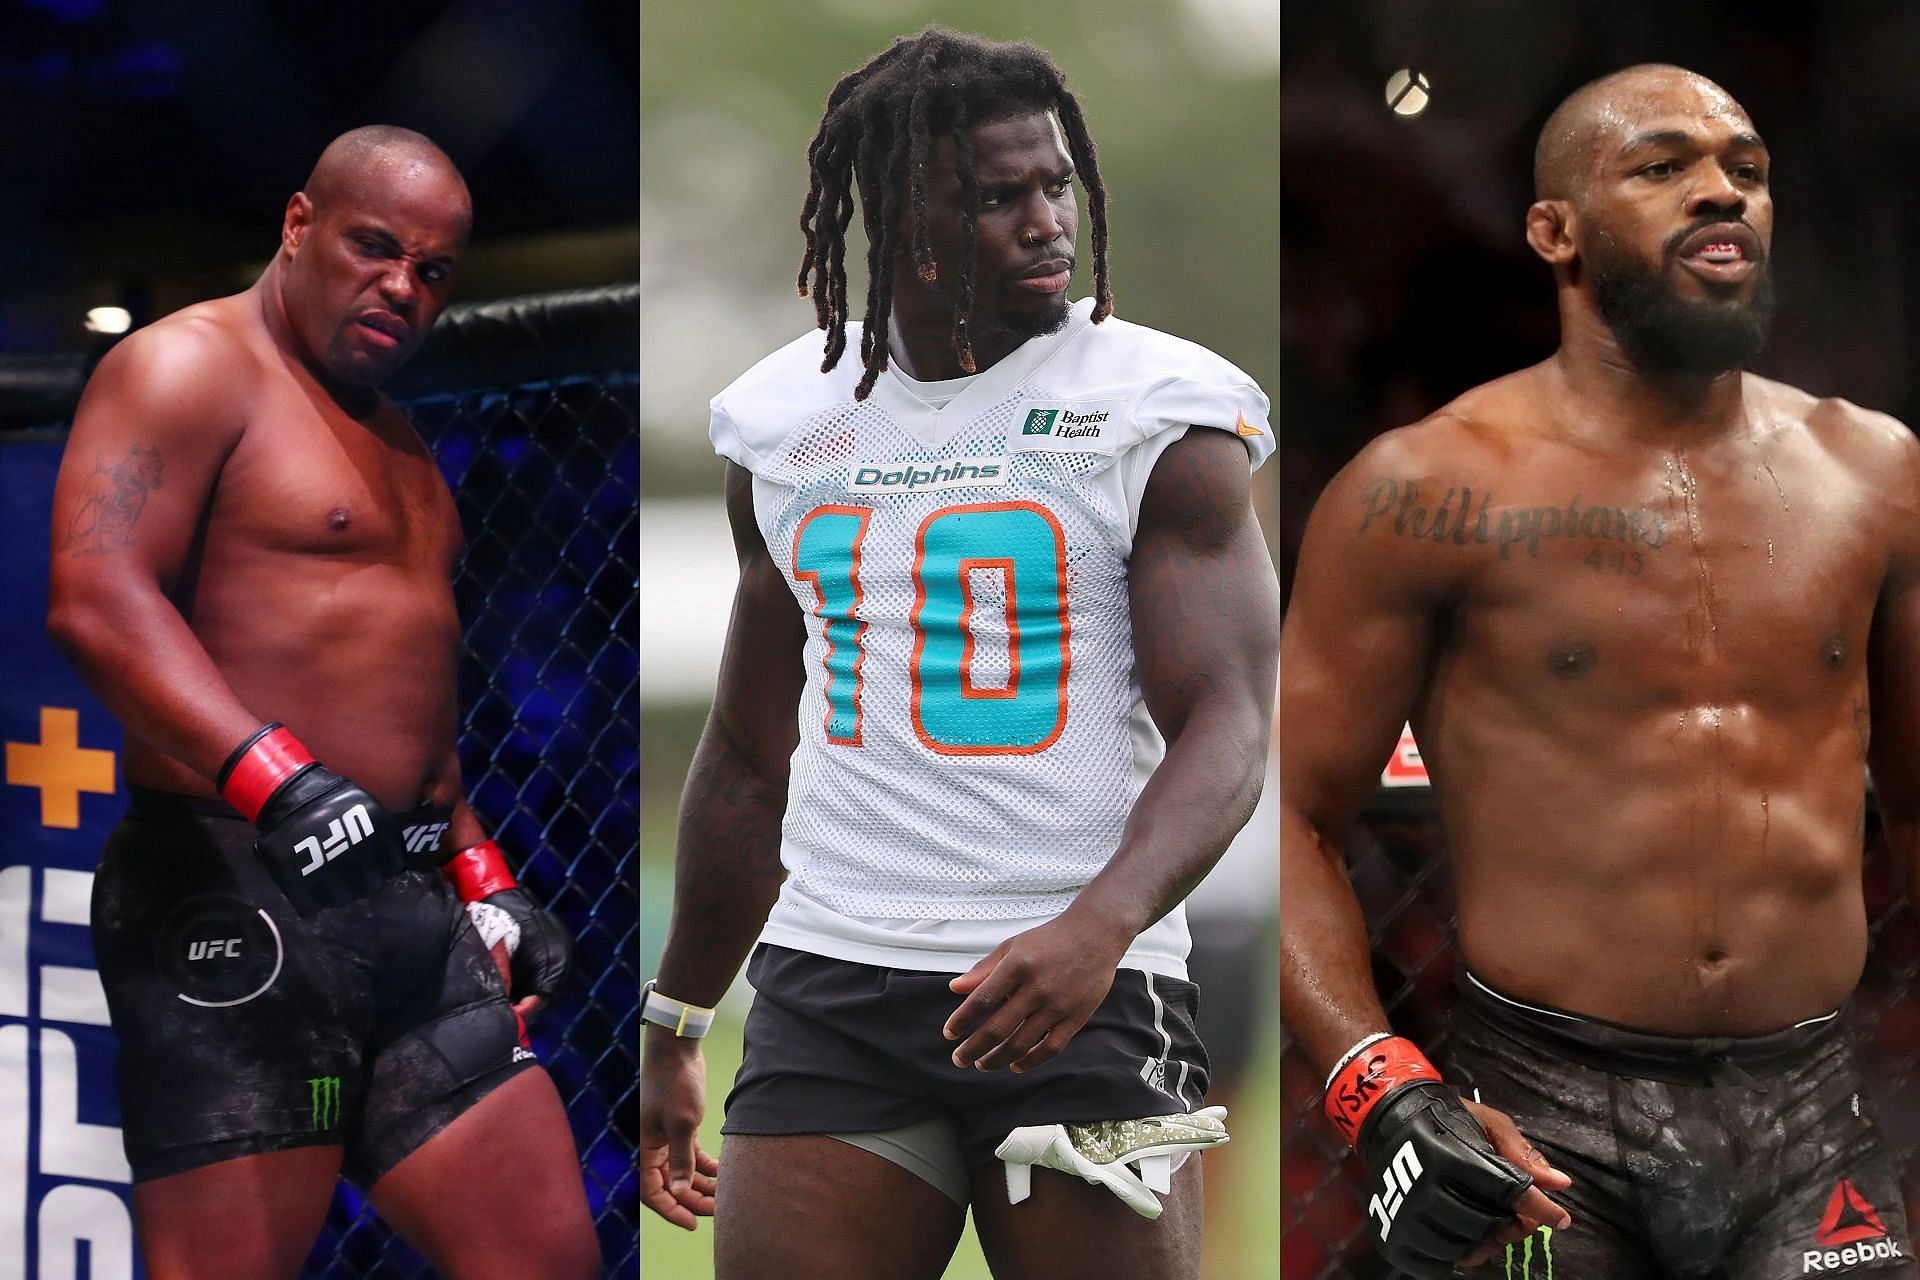 Dolphins WR Tyreek Hills shows admiration for Jon Jones for his iconic win over Daniel Cormier